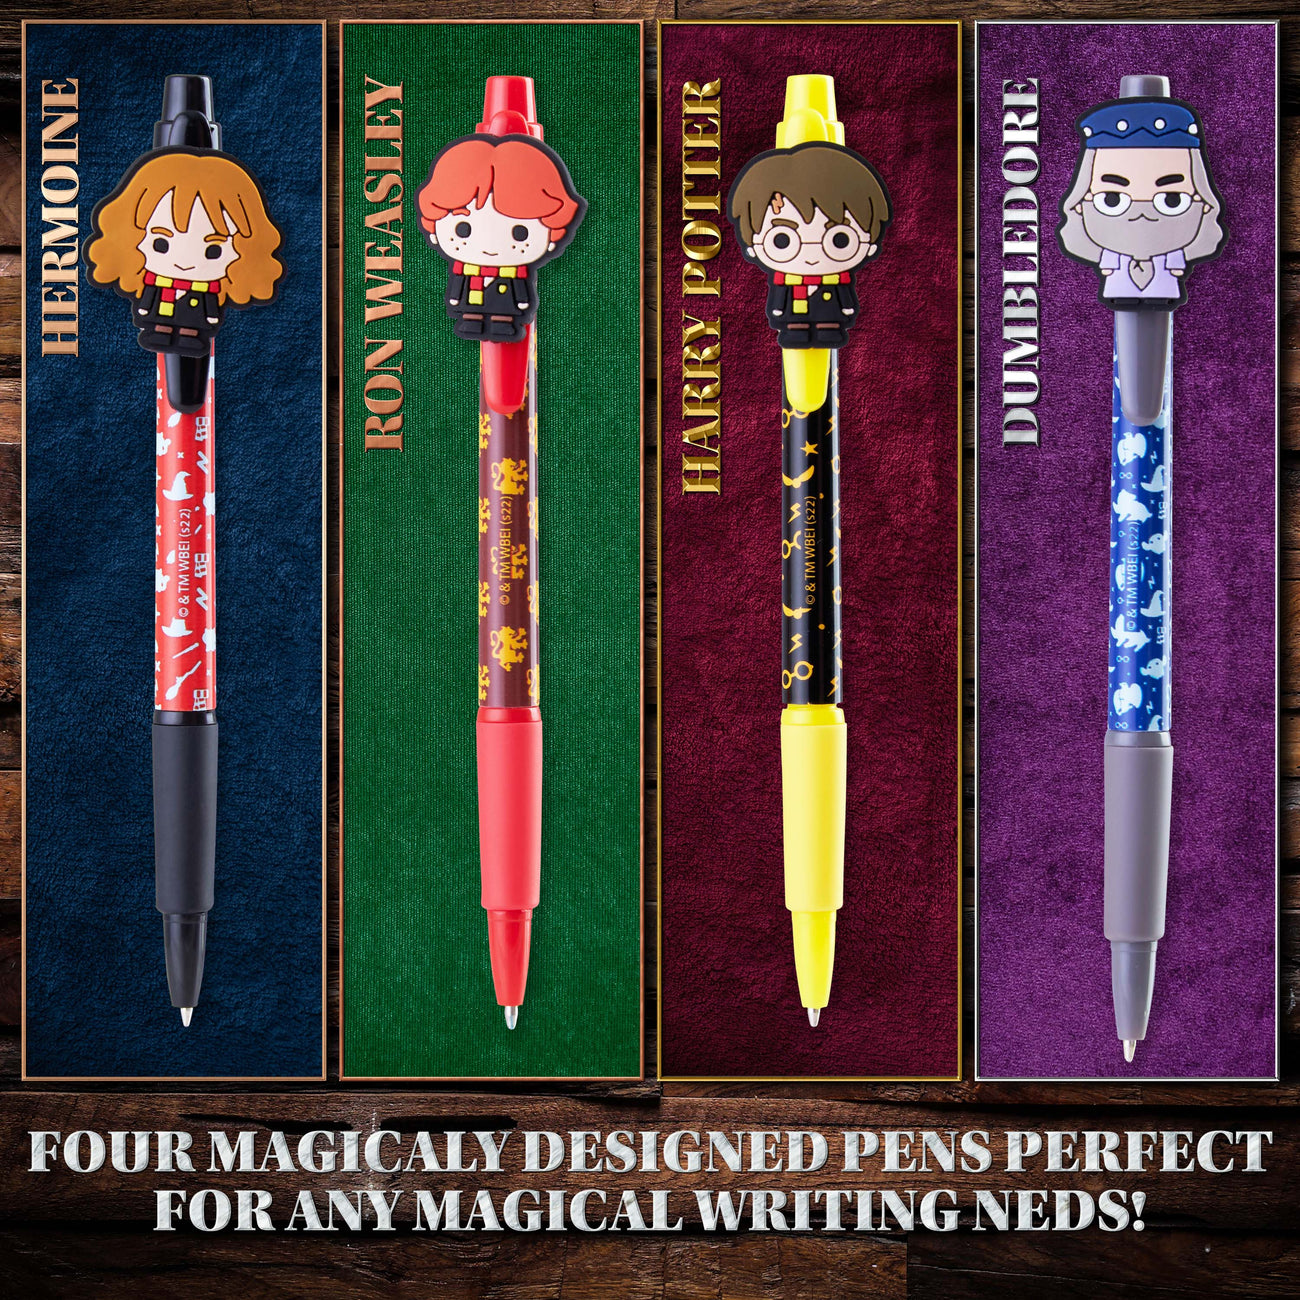  HARRY POTTER 4-Pack Ball Pen Set B, Multicolor, 1 : Office  Products